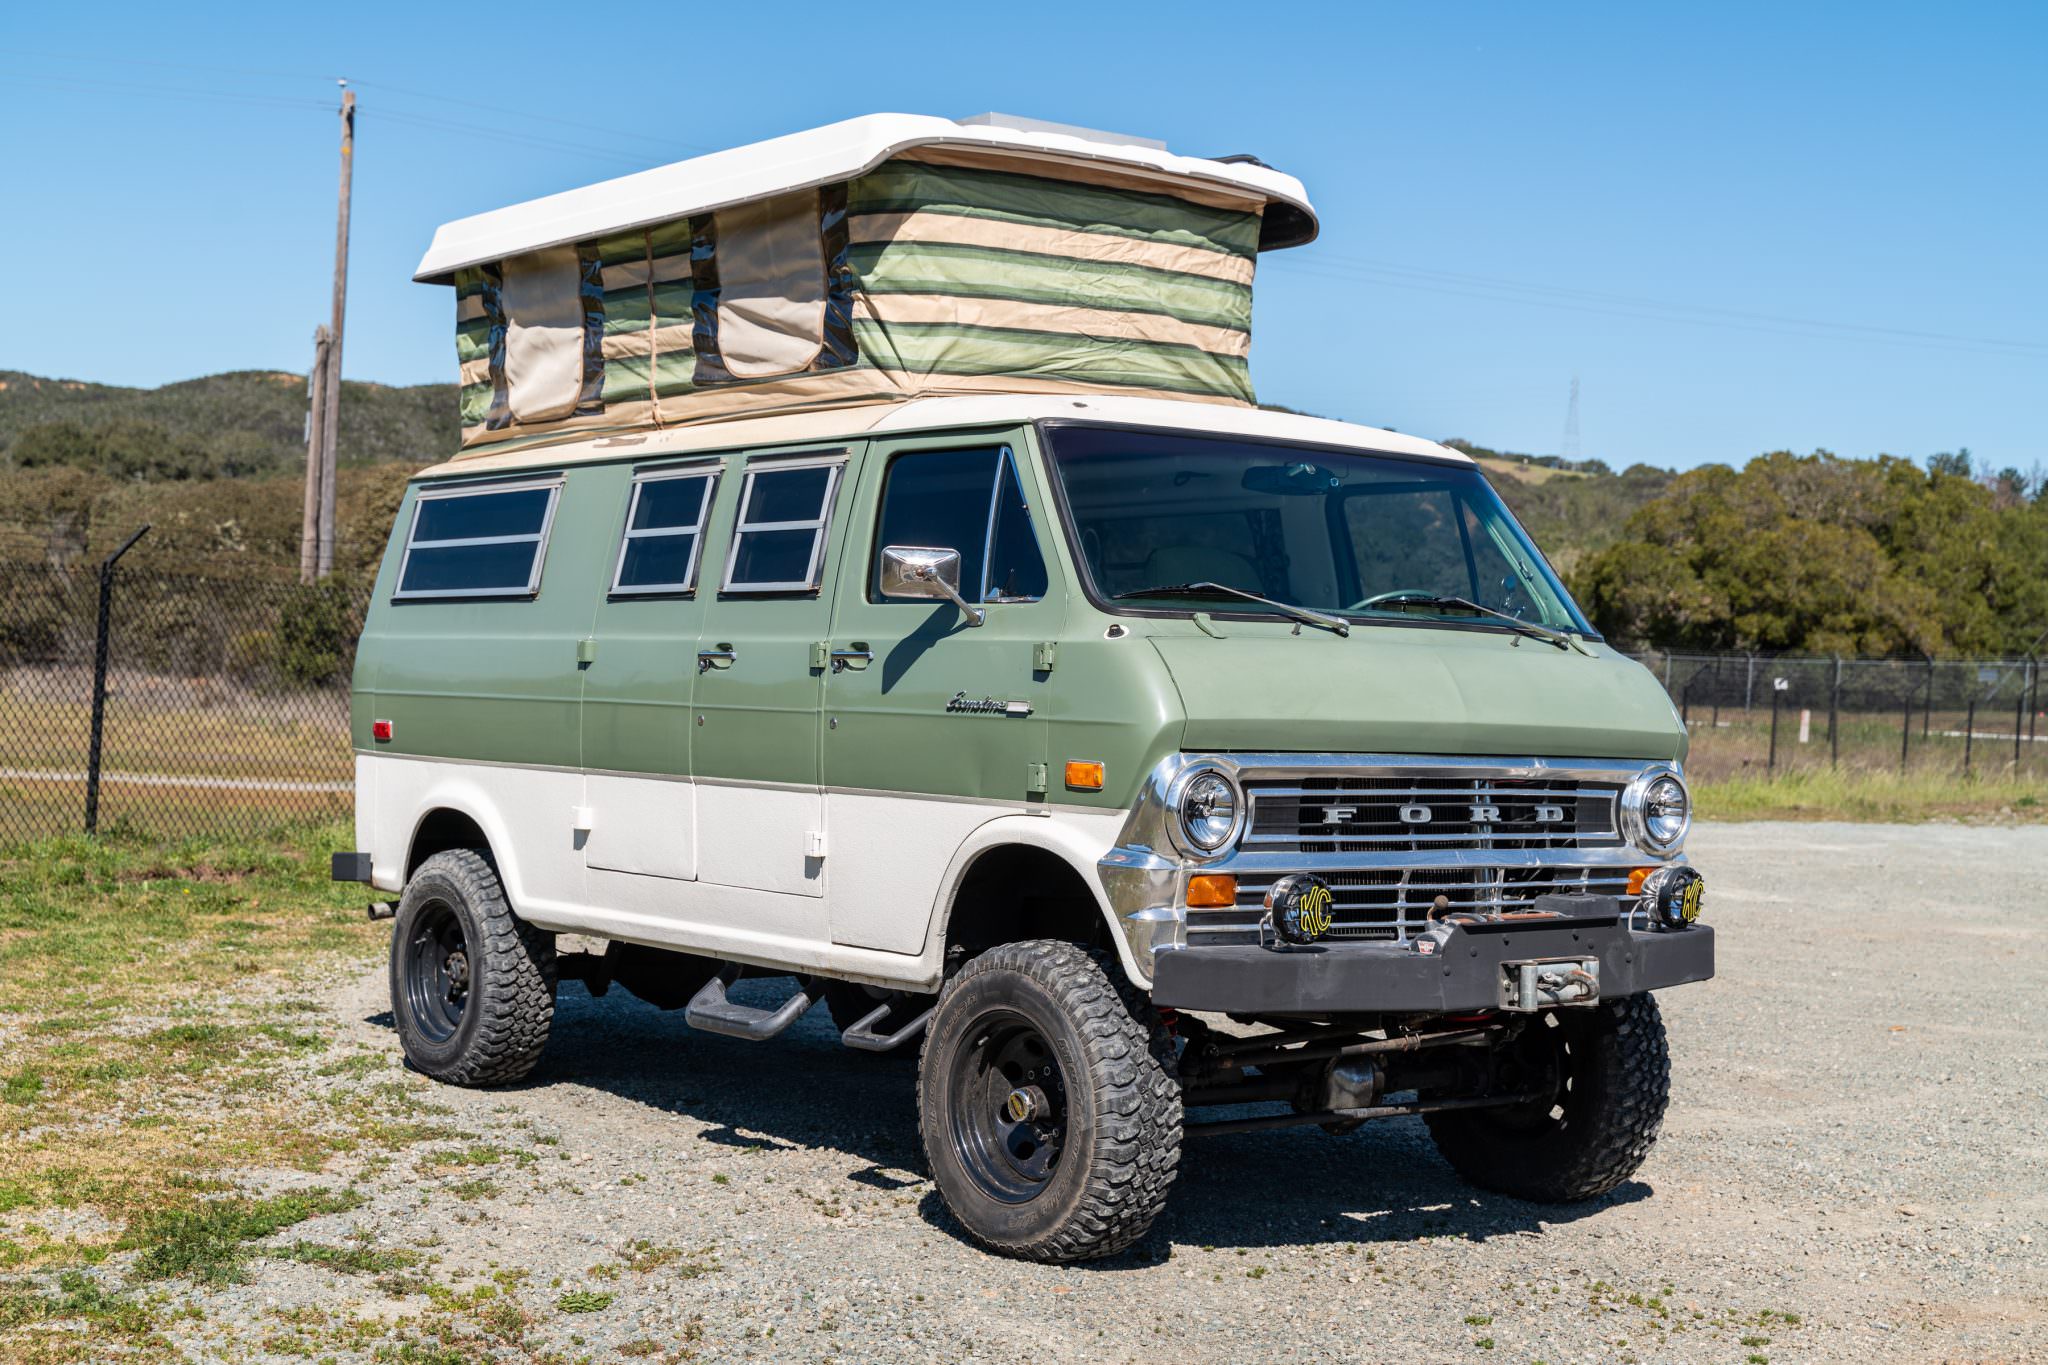 Sportsmobile's Off-Road Classic 4x4 Ford Camper Van With a 'Penthouse' for  $225,000